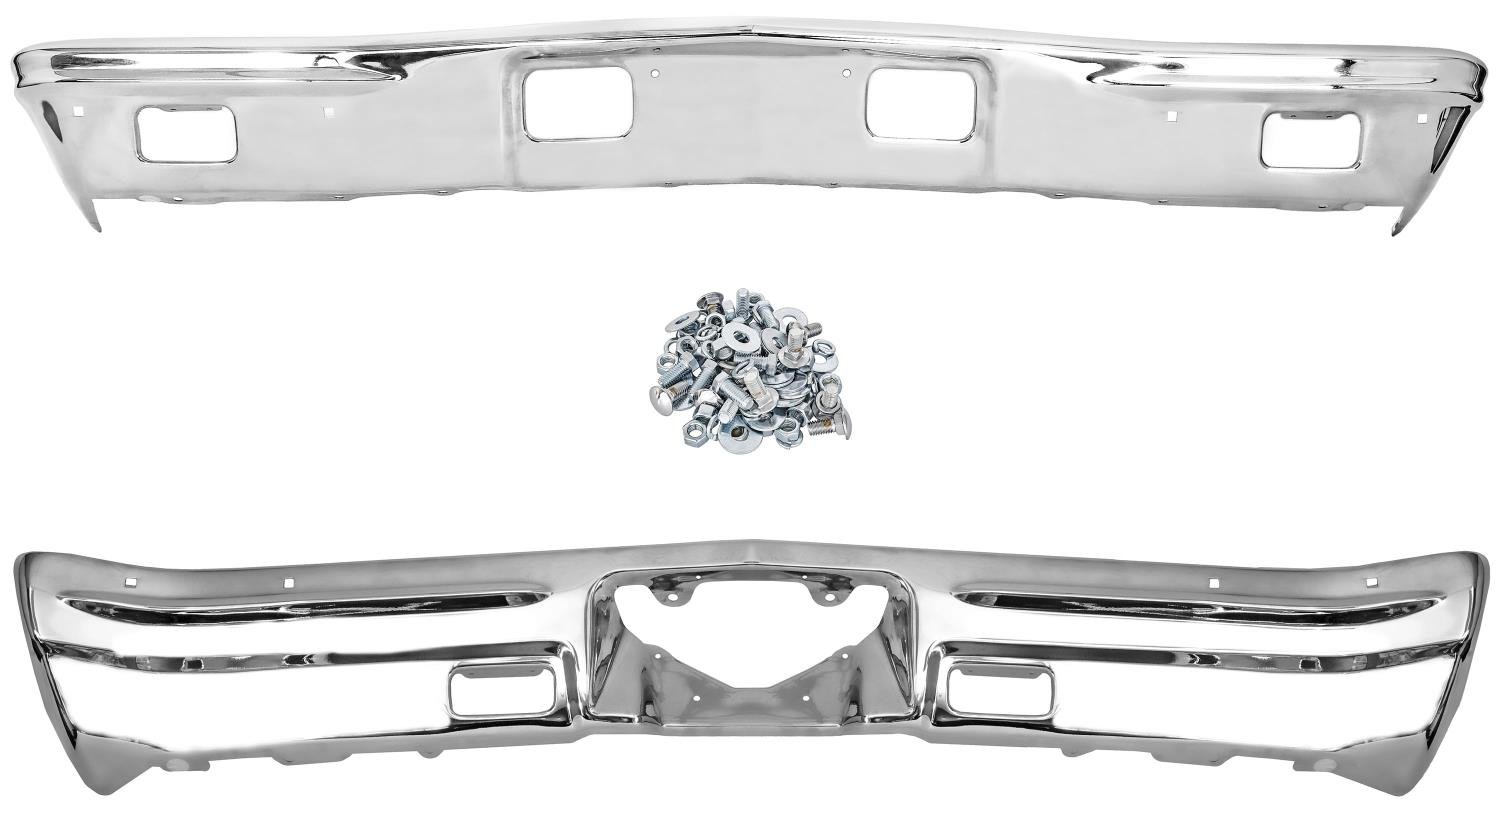 Bumper Kit with Mounting Hardware for 1968 Chevrolet